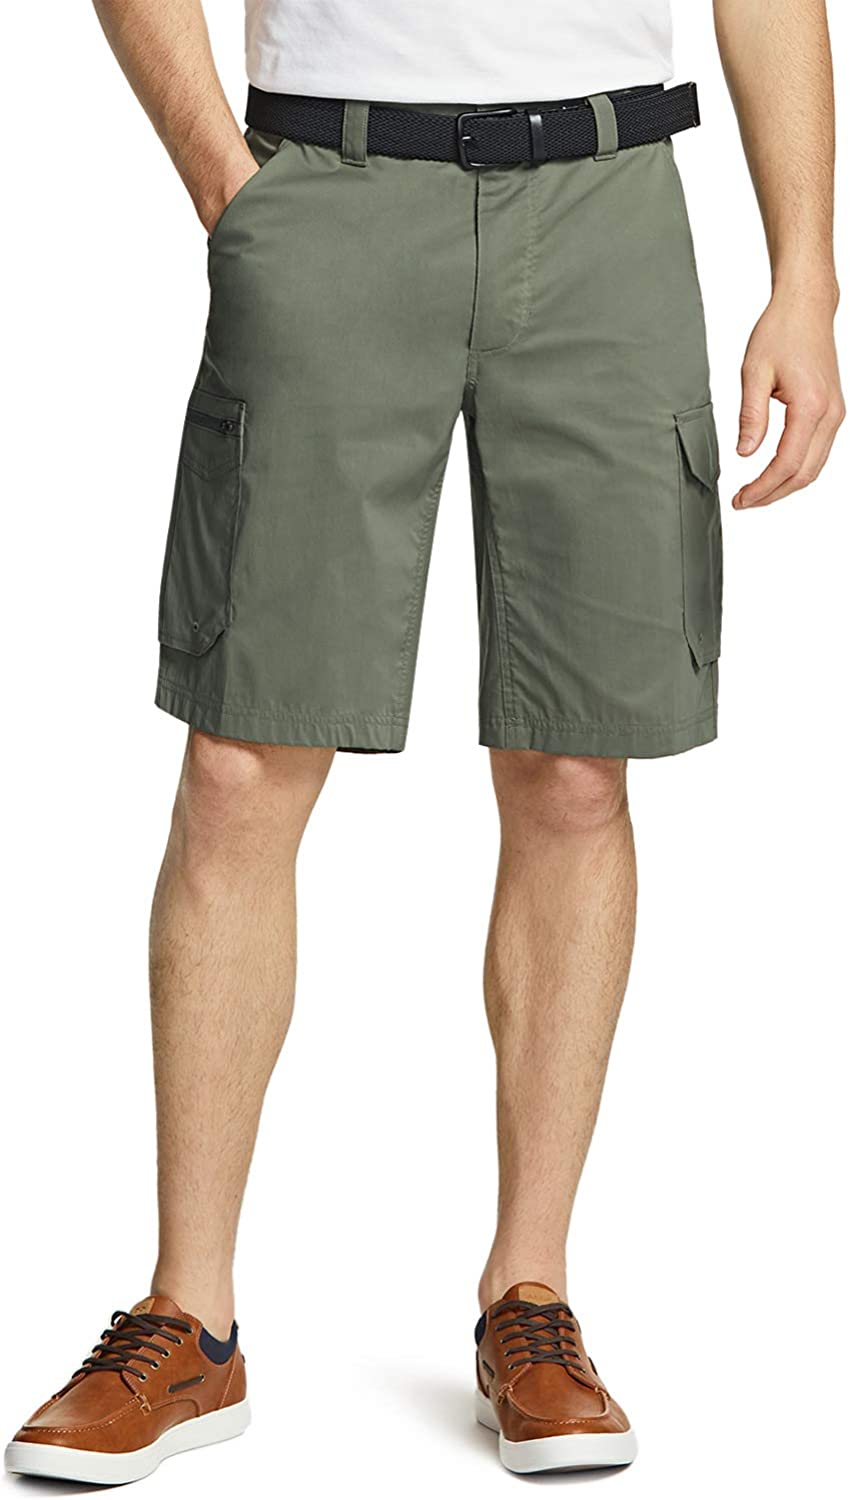 CQR Men's On-The-Go Cargo Shorts Outdoor Stretch Multi-Pocket Cargo Shorts Lightweight Relaxed Fit Casual Shorts 